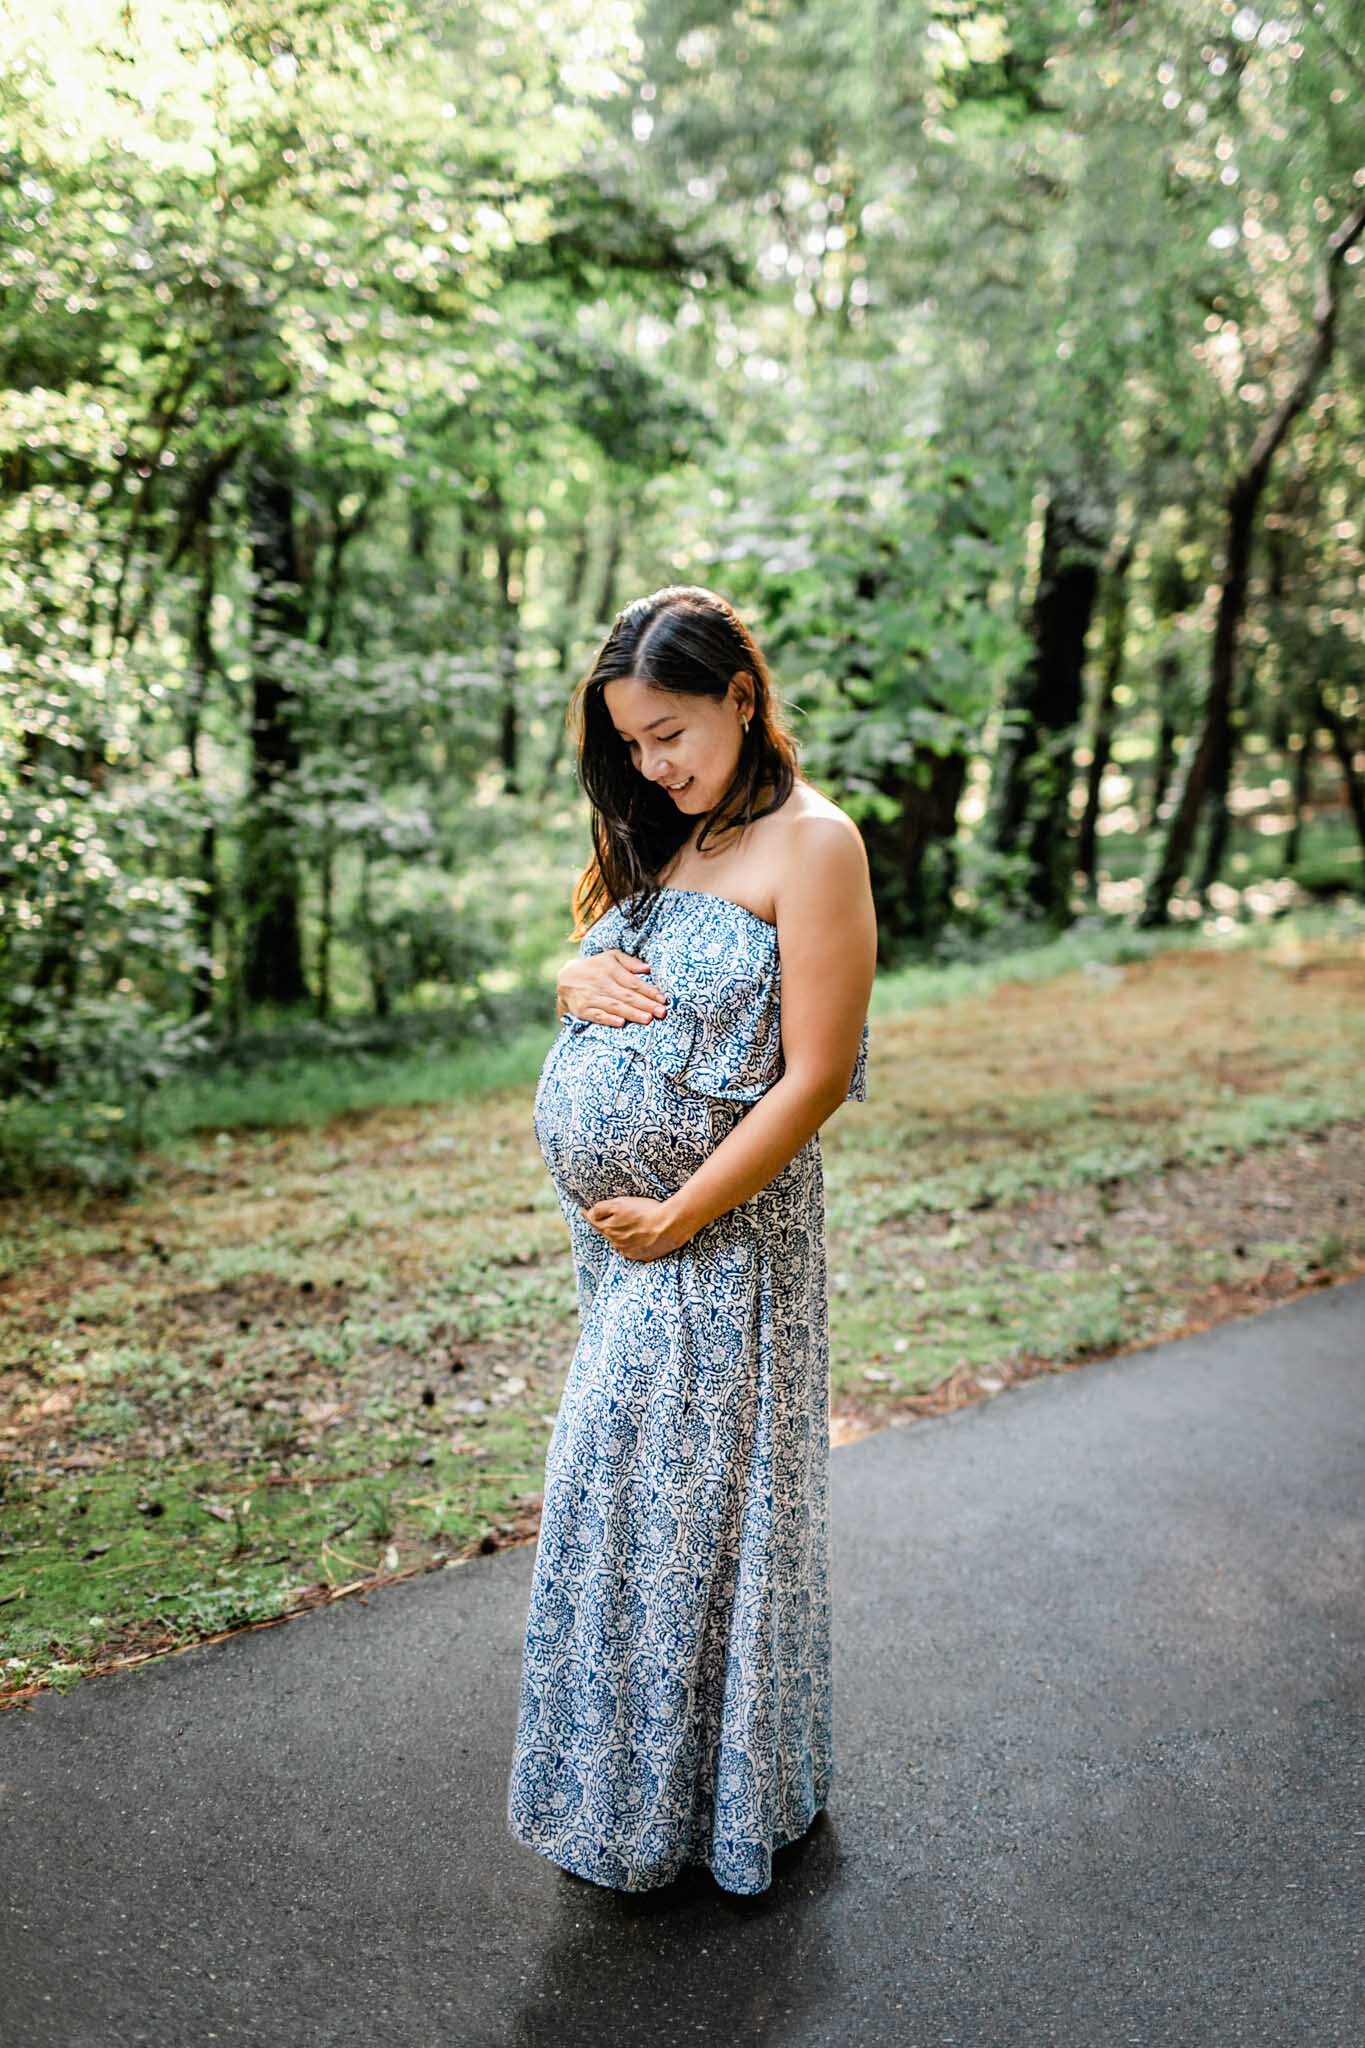 Raleigh Maternity Photographer | By G. Lin Photography | NCMA Maternity Photos | Woman standing and holding baby bump